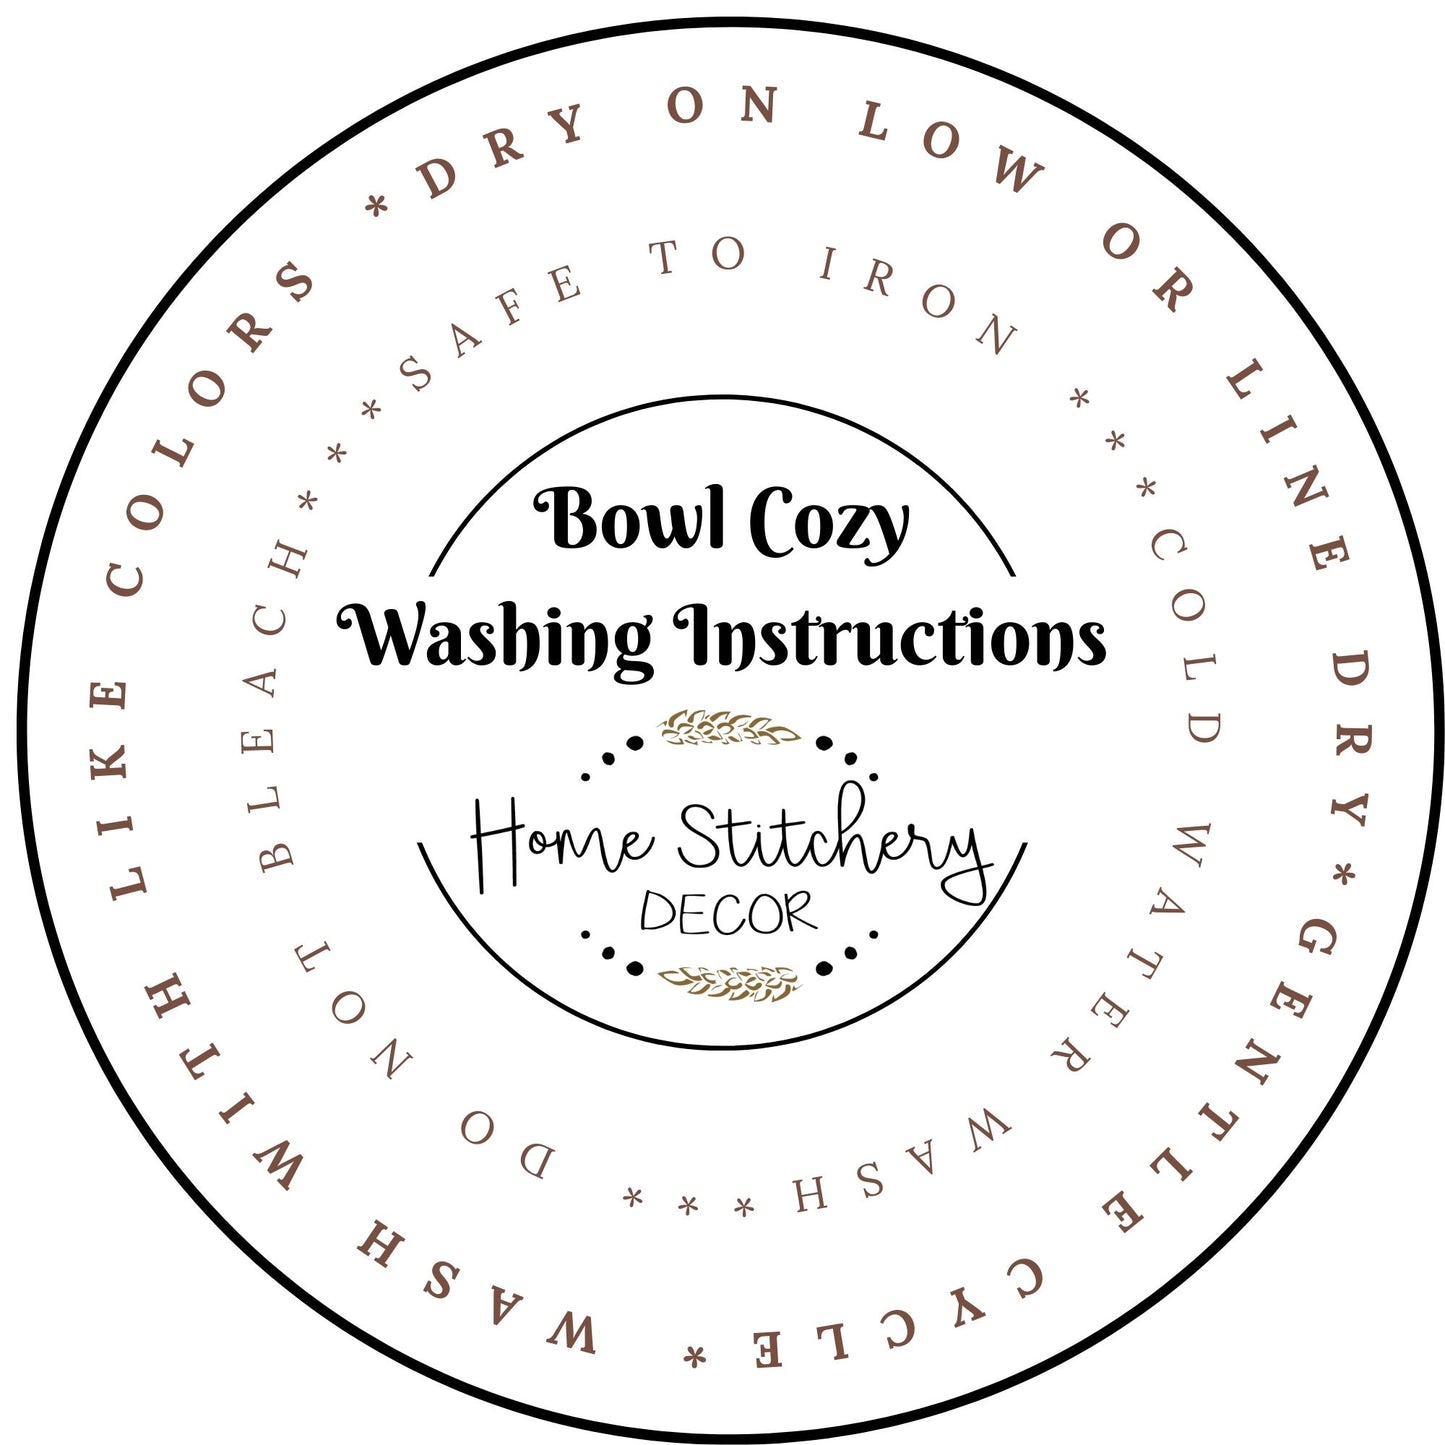 Washing Instructions for Microwave Soup Bowl Cozy. Wash with like colors, dry on low or line dry. Safe to Iron. Do not bleach. 